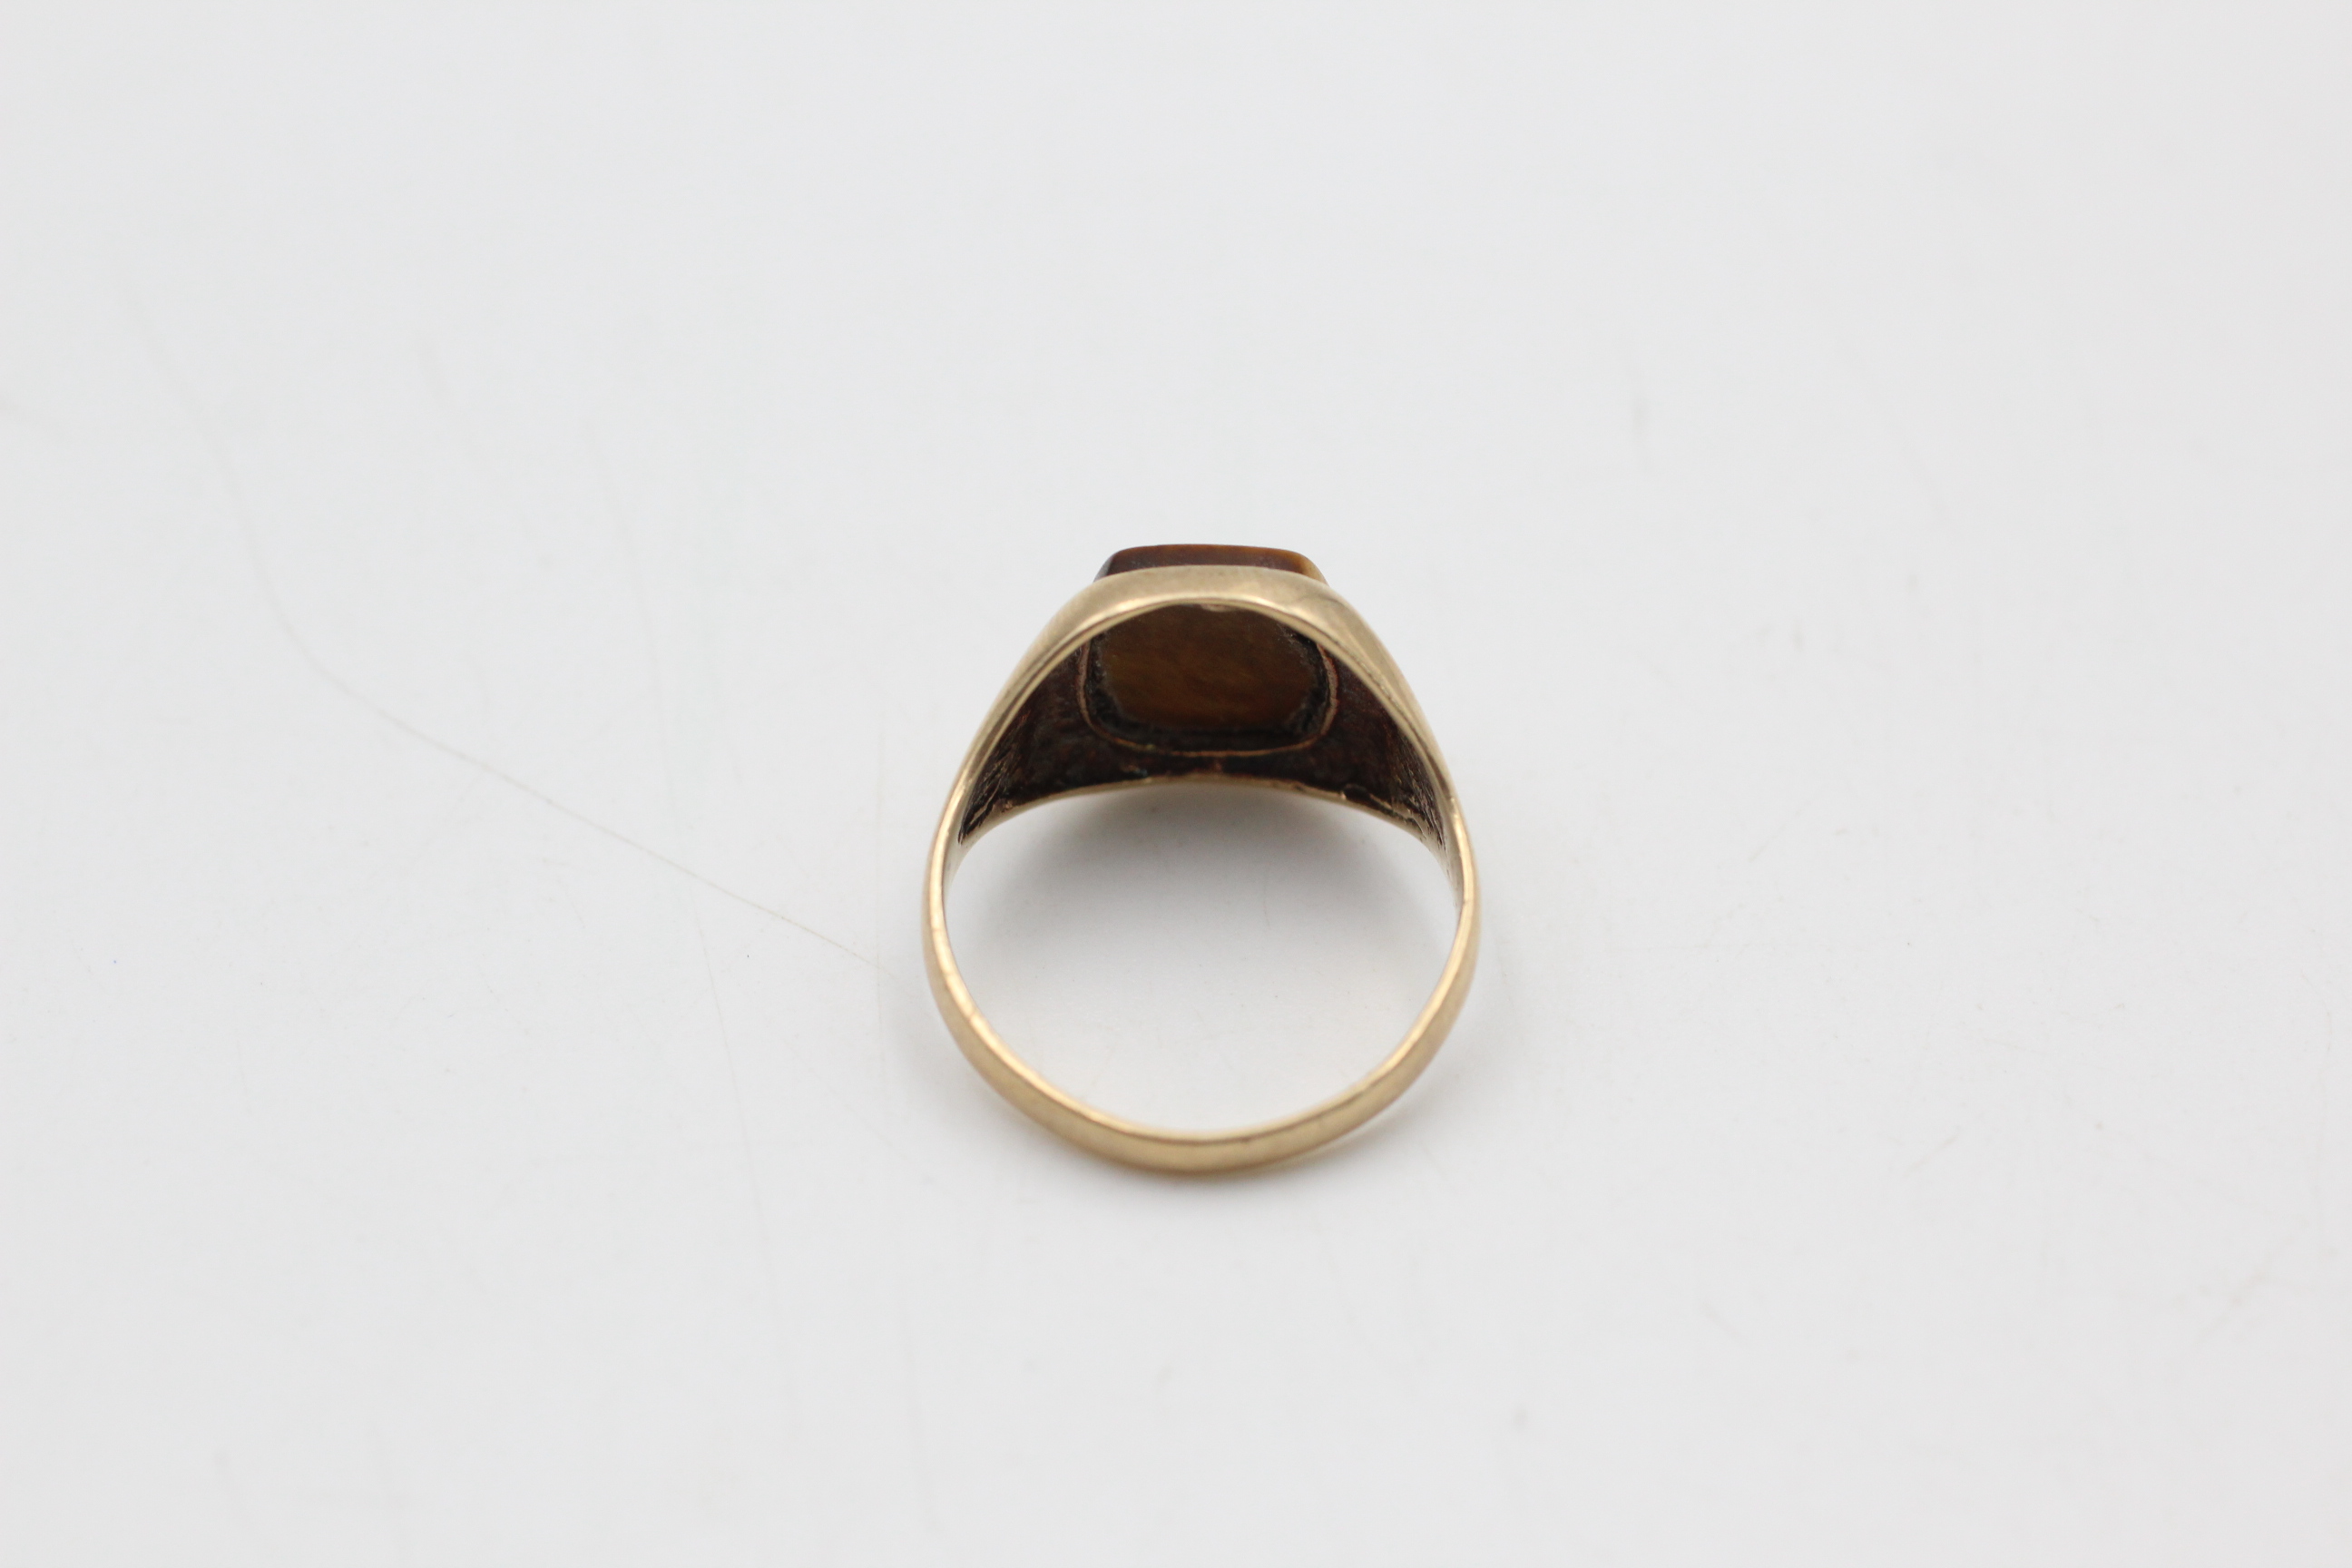 9ct gold tigers eye ring (3.8g) - Image 3 of 5